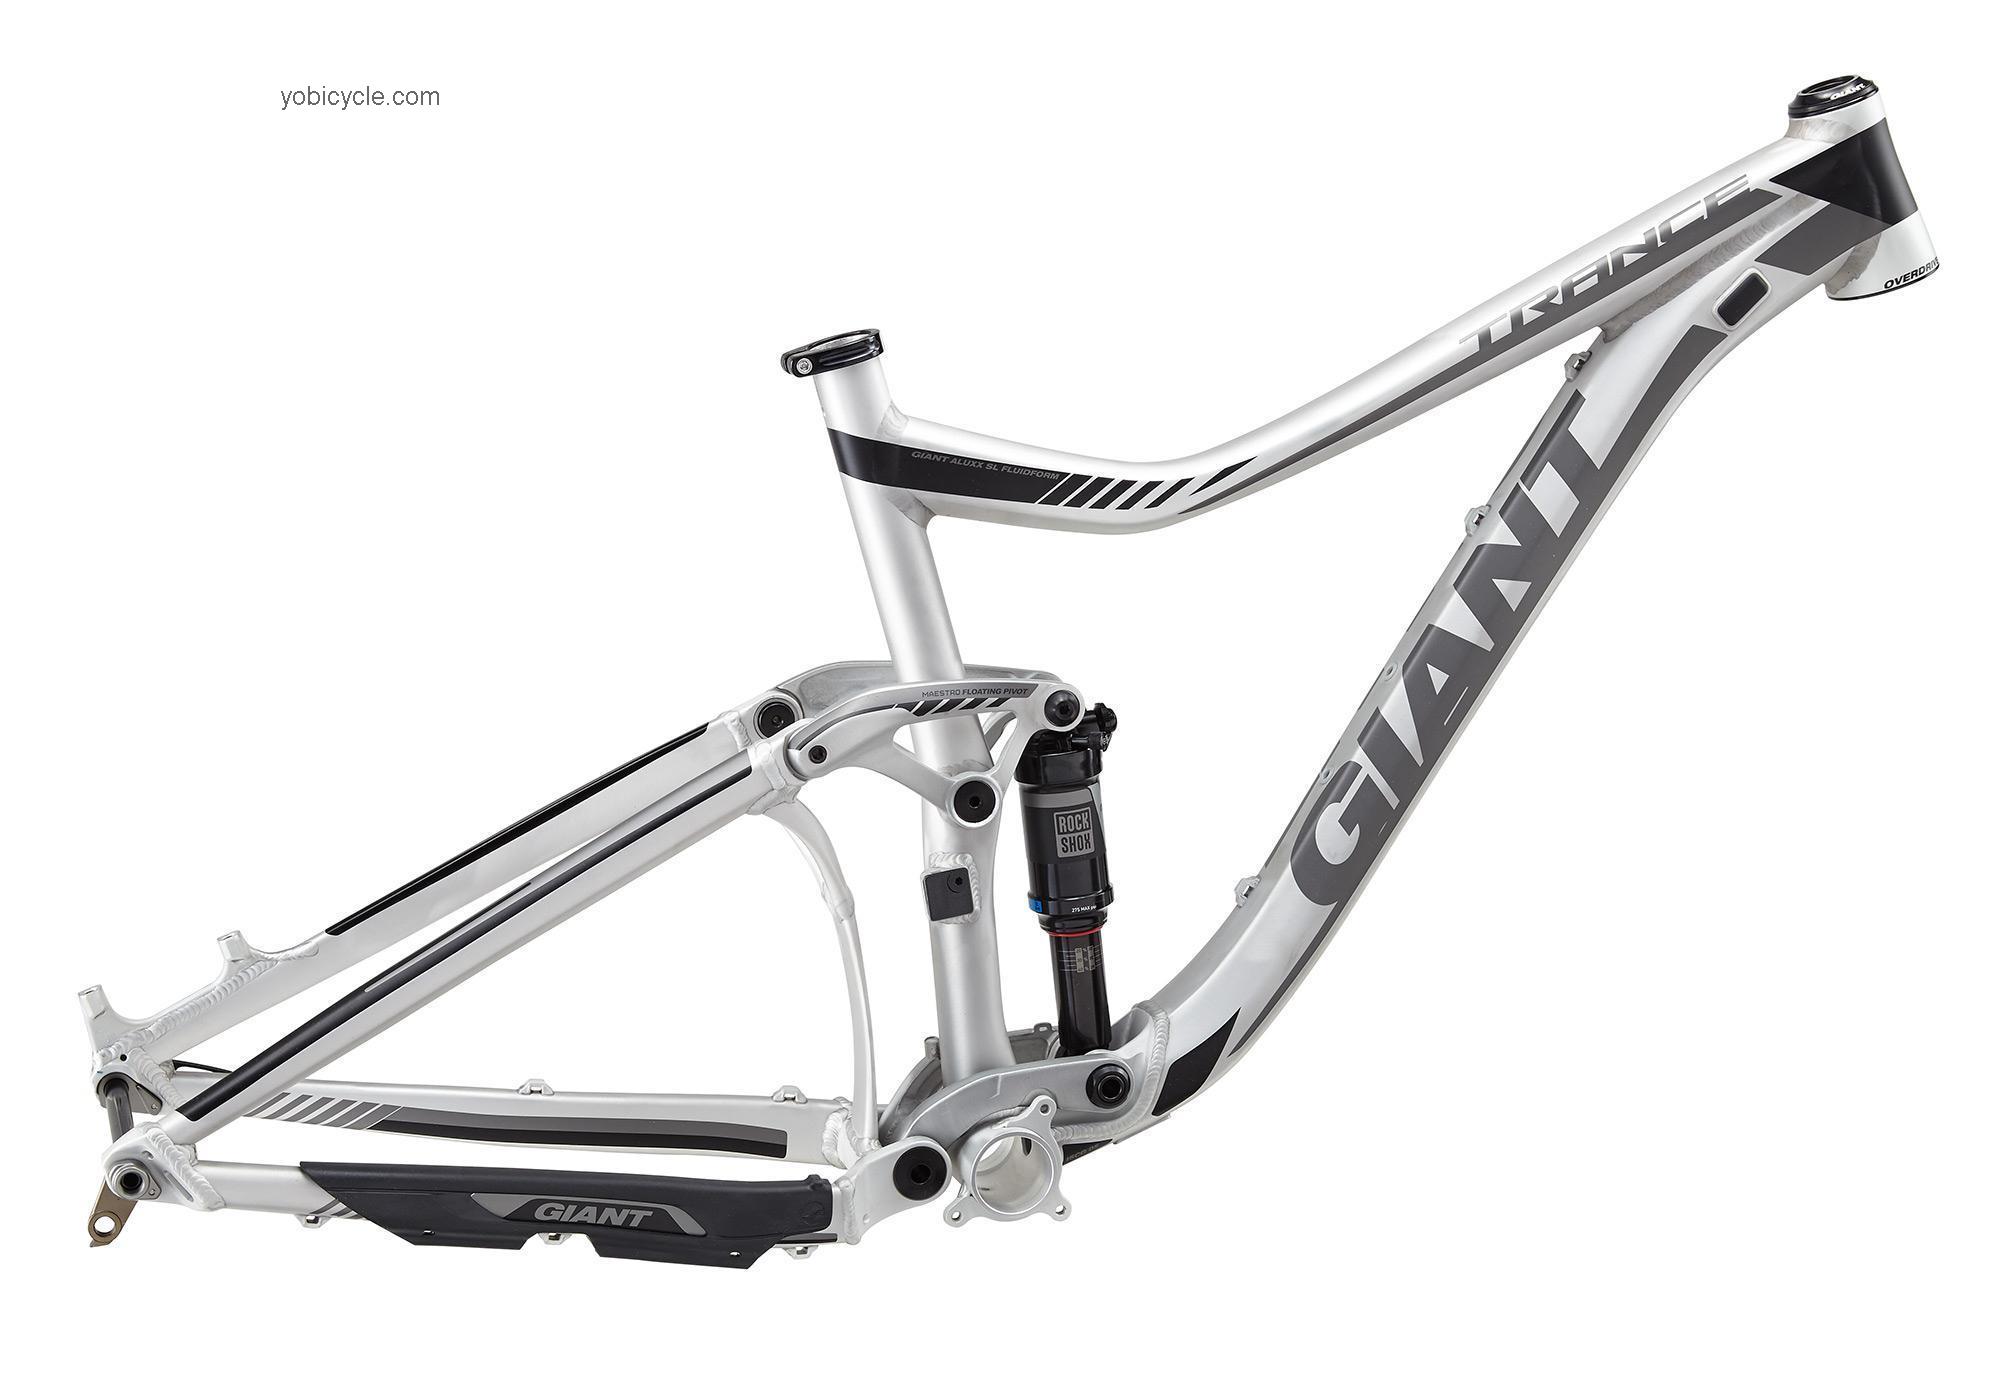 Giant  Trance 27.5 Frameset Technical data and specifications